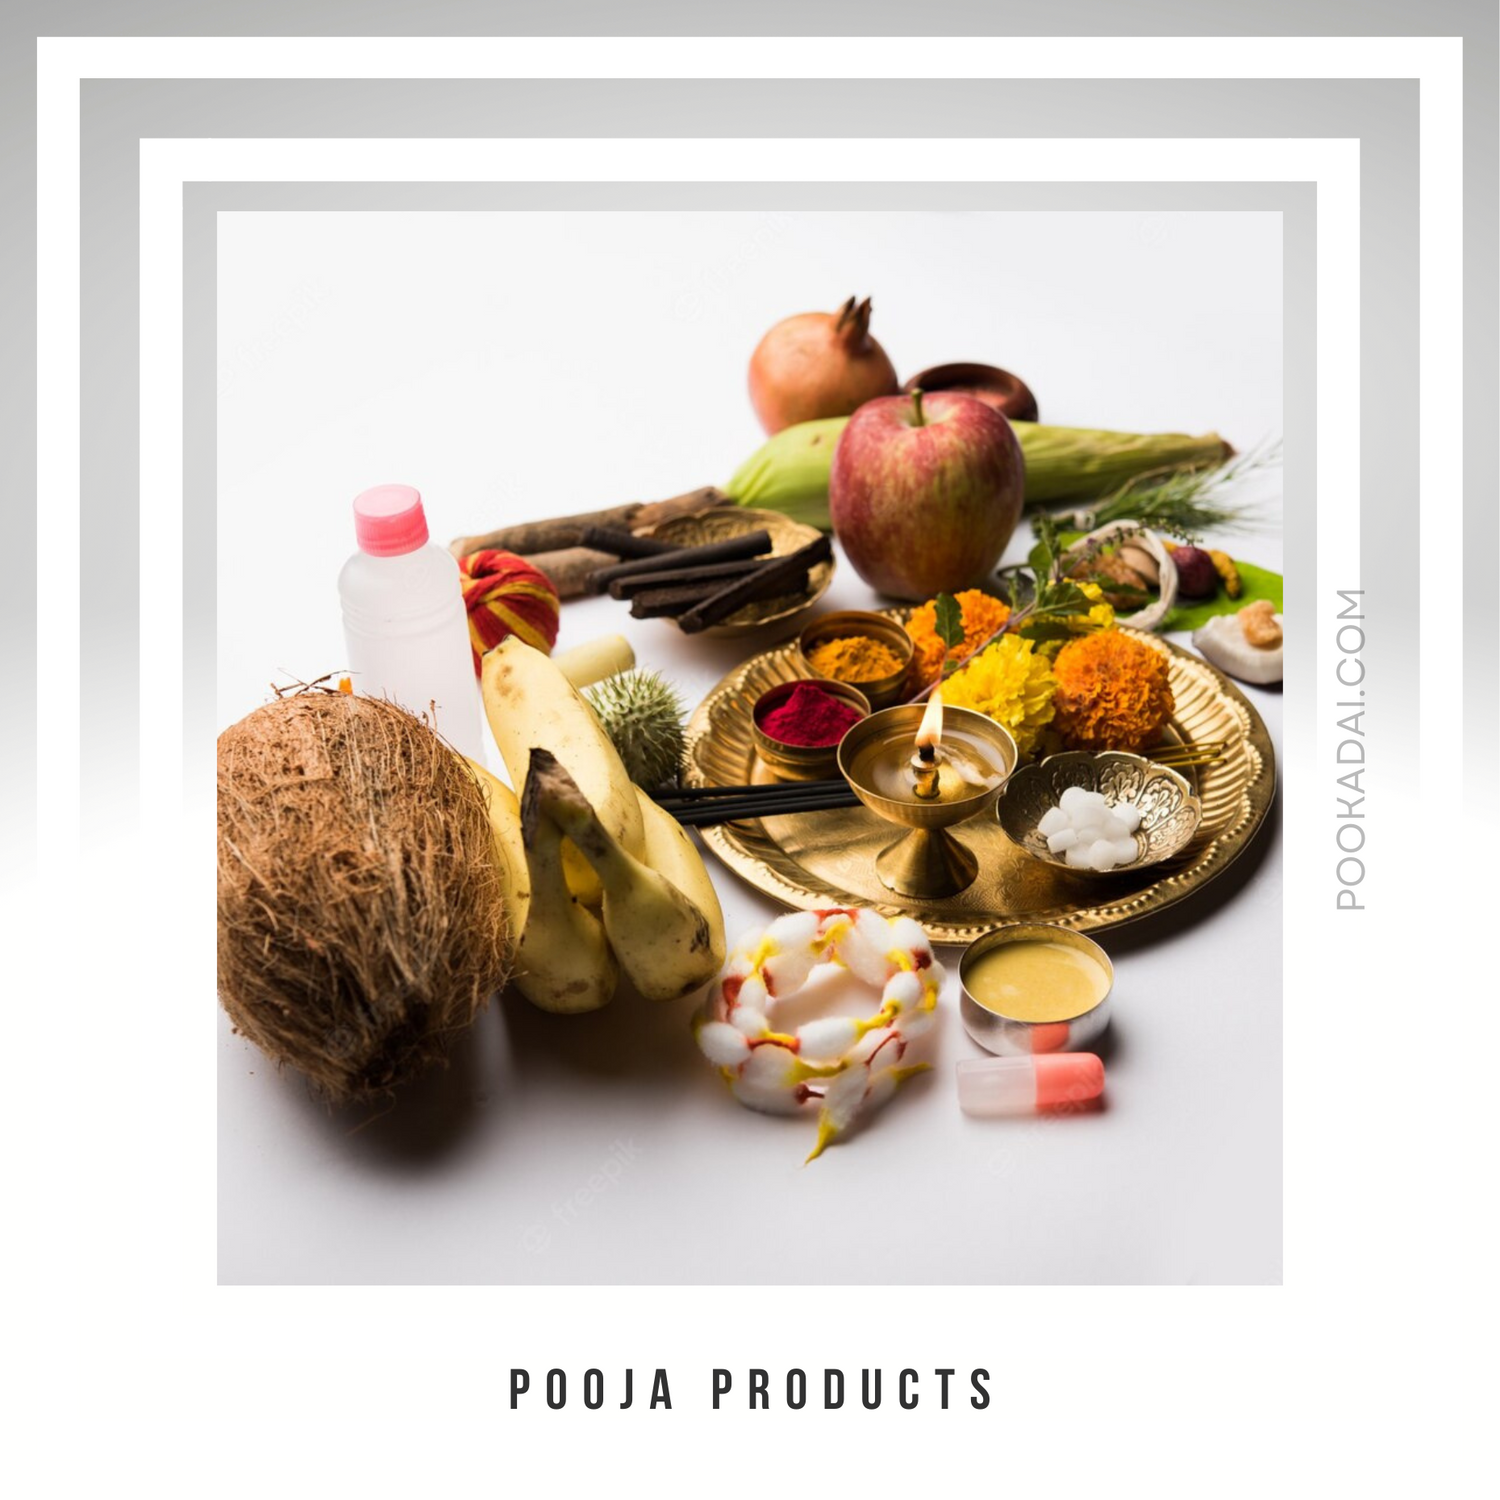 Pooja Products